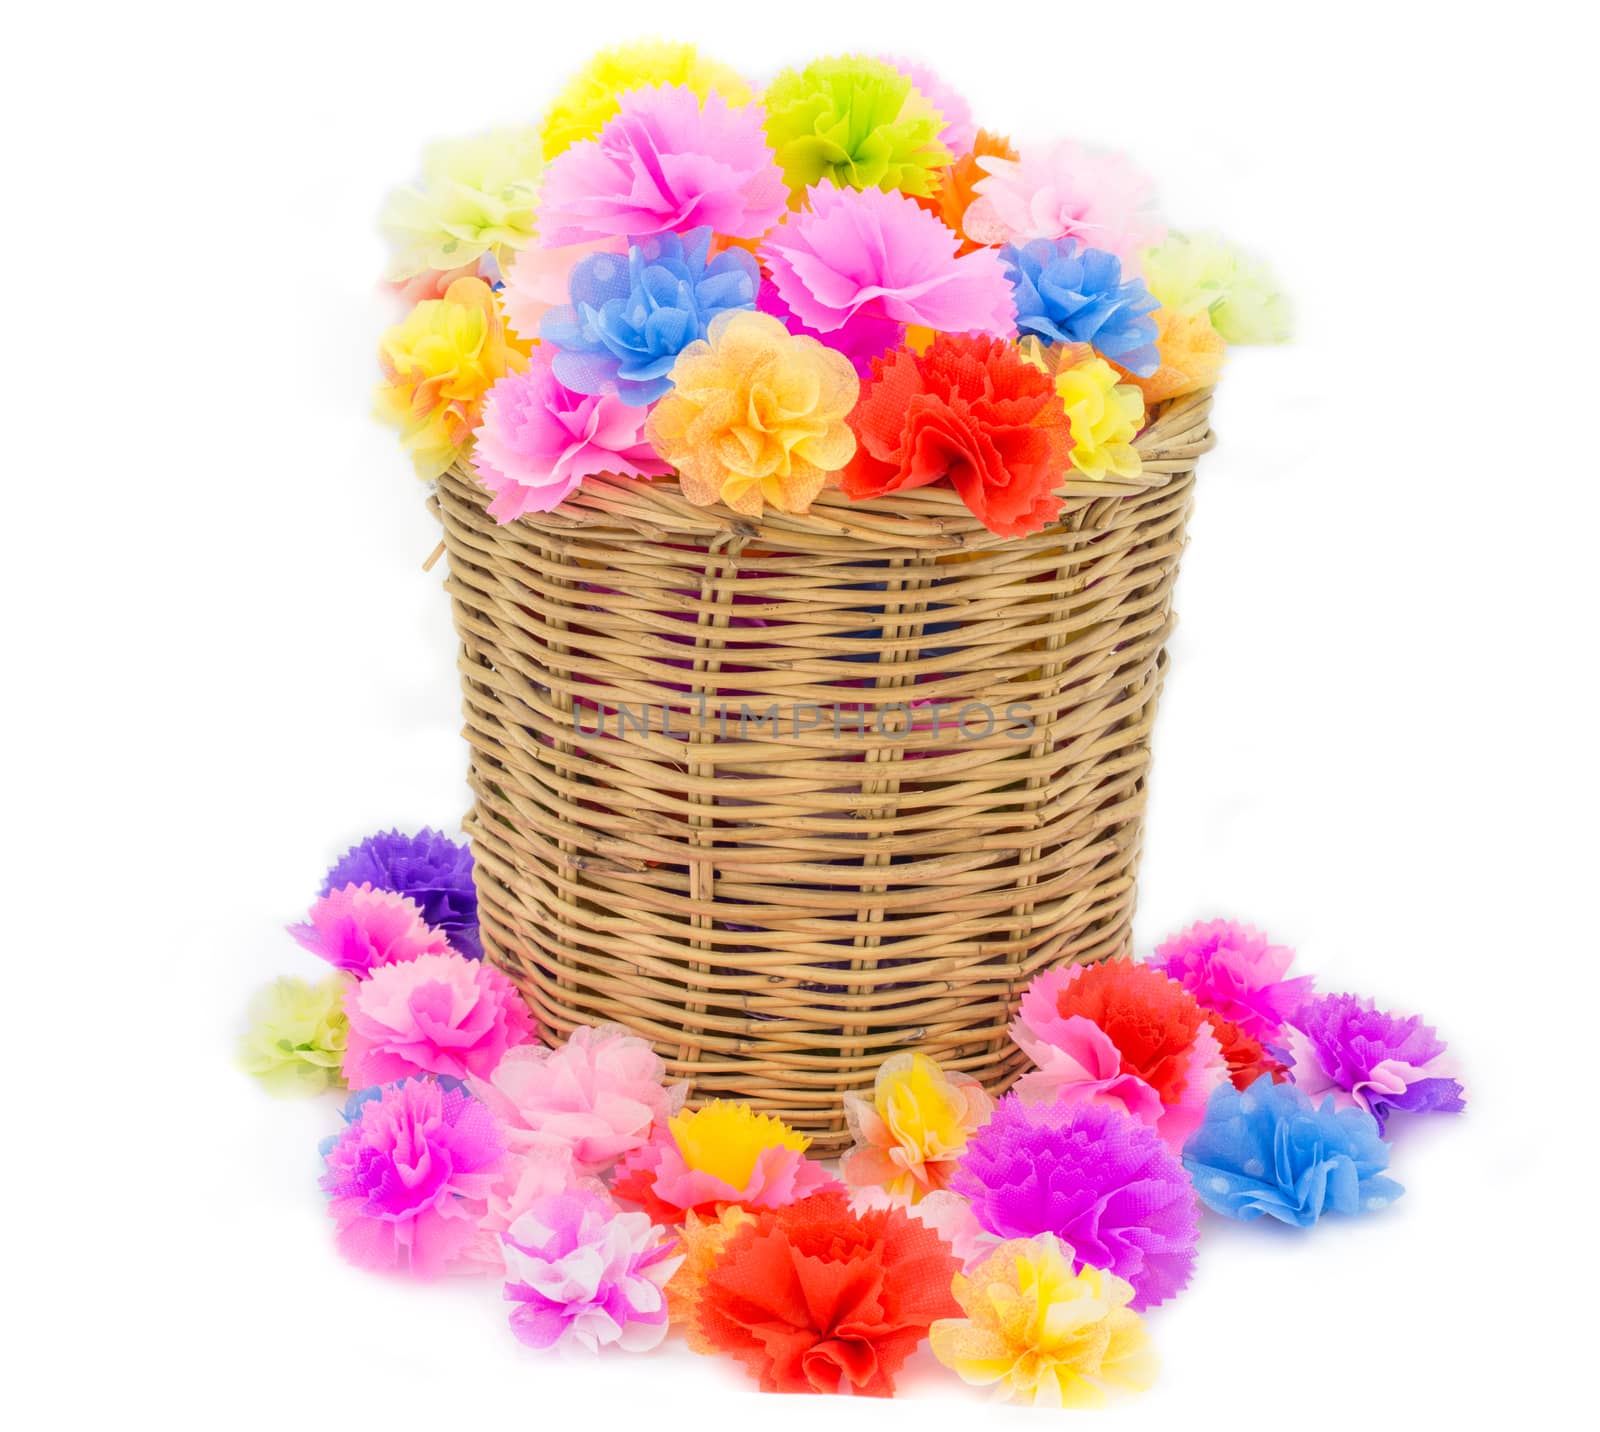 Bright flowers in basket isolated on white